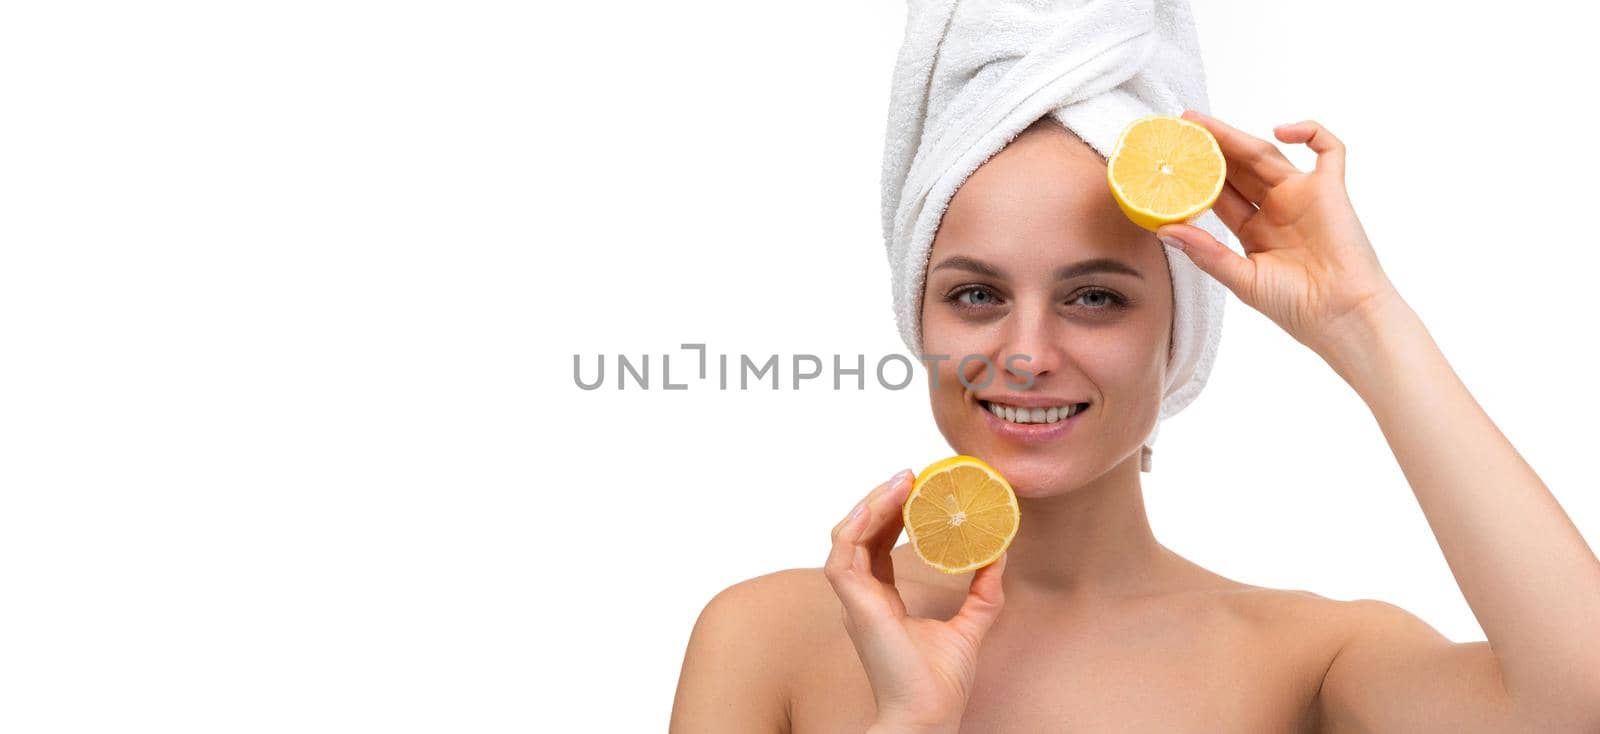 cheerful young woman with a smile on her face after a shower holds a cut orange in her hands by TRMK